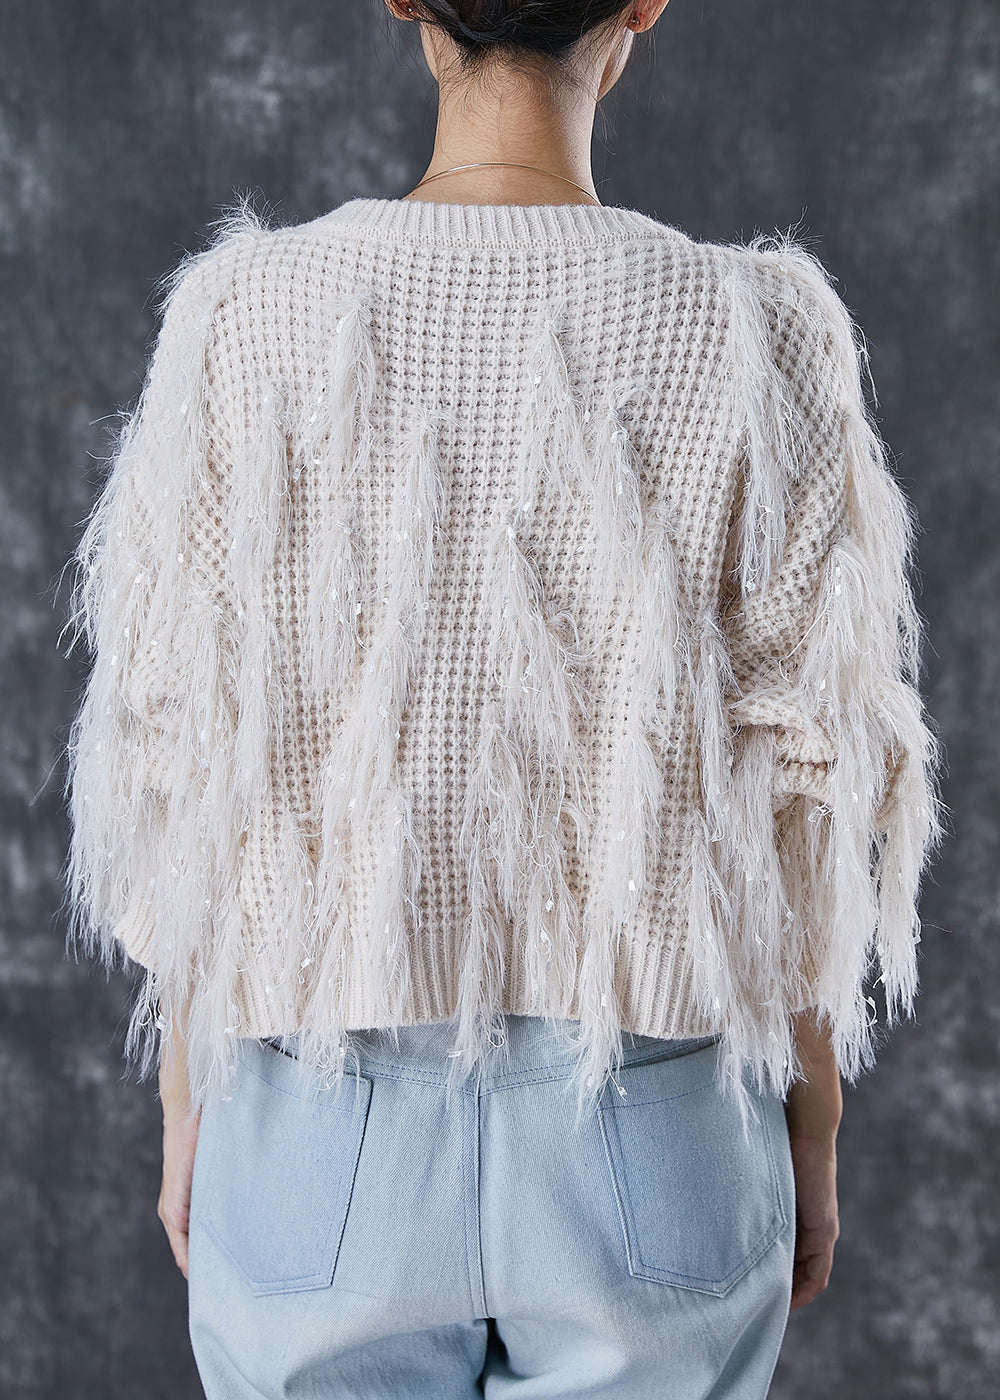 White Thick Knit Sweaters Tasseled Sequins Winter